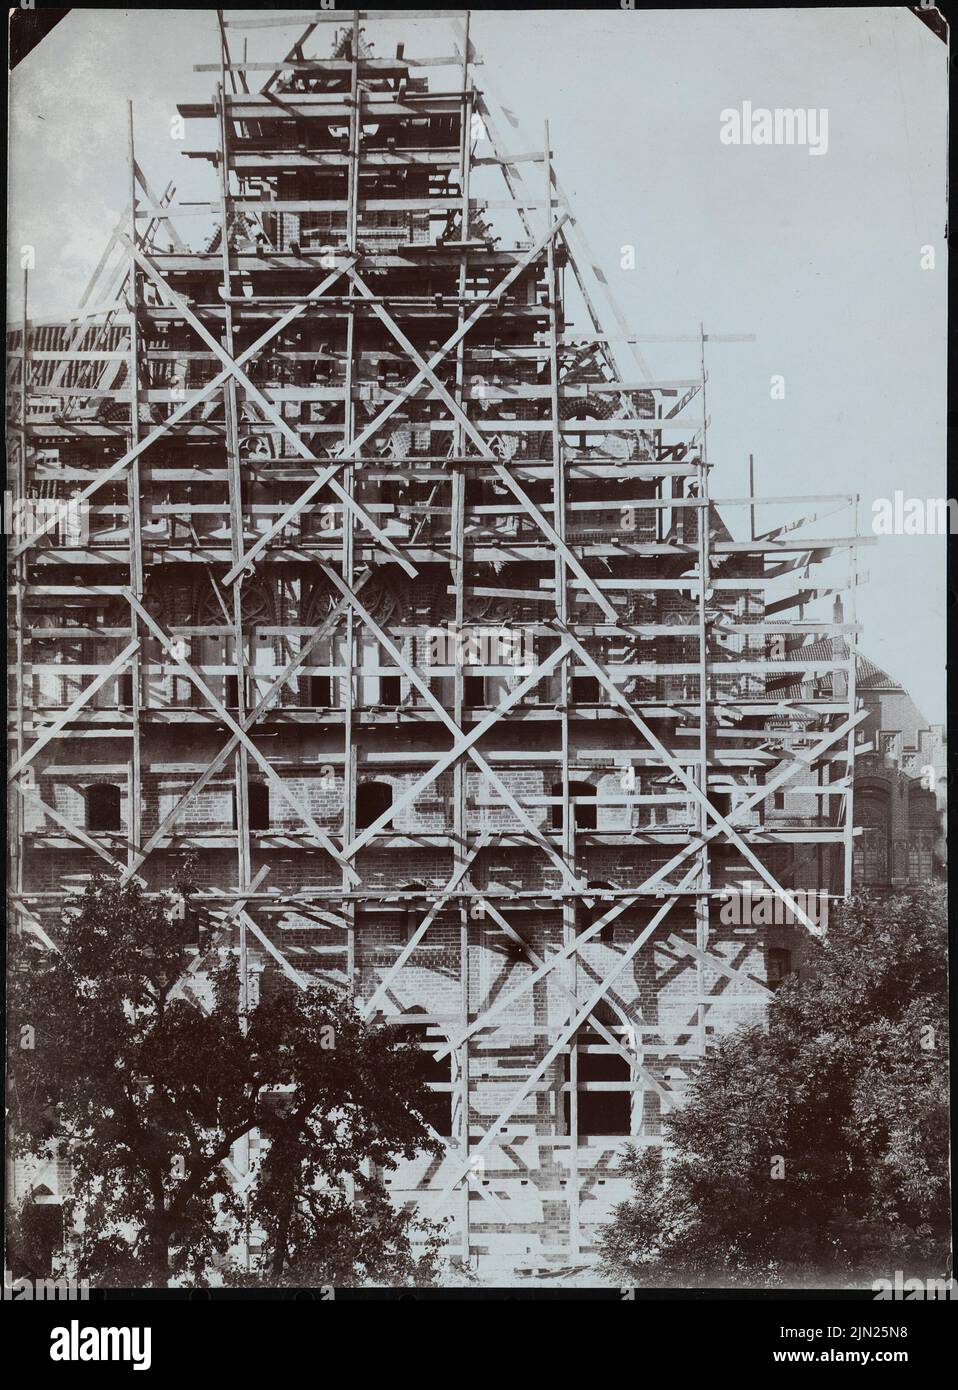 Steinbrecht Conrad (1849-1923), Marienburg, Restoration under Steinbrecht 1882-1918, letters and photos to R. Persius: Construction work on the Giebel of the Firmarie. Photo on cardboard, 17.5 x 12.9 cm (including scan edges) Stock Photo